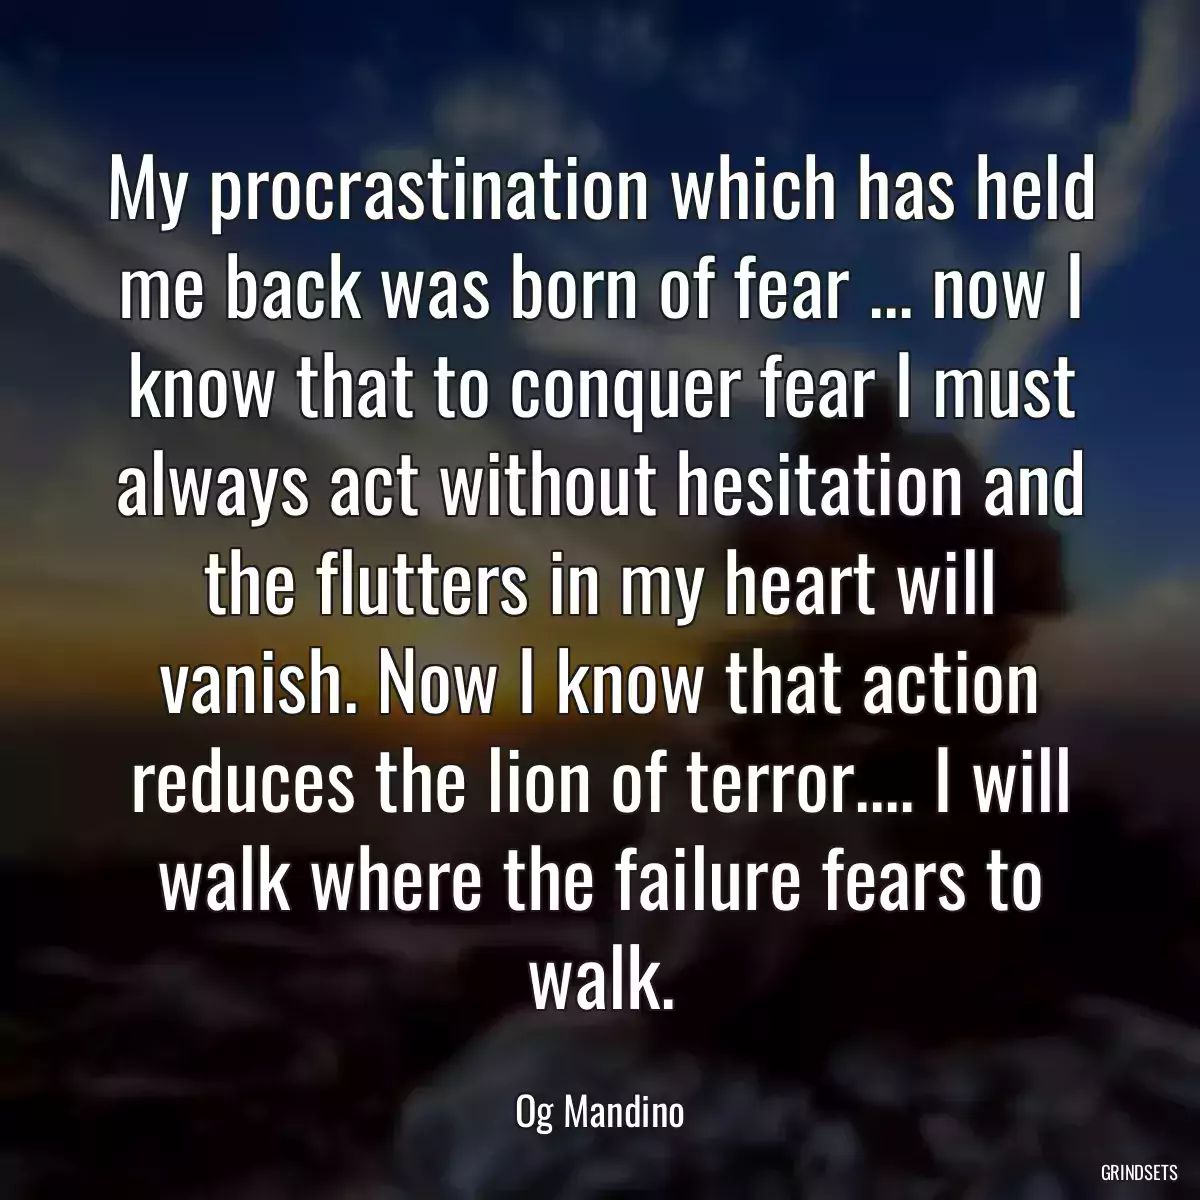 My procrastination which has held me back was born of fear ... now I know that to conquer fear I must always act without hesitation and the flutters in my heart will vanish. Now I know that action reduces the lion of terror.... I will walk where the failure fears to walk.